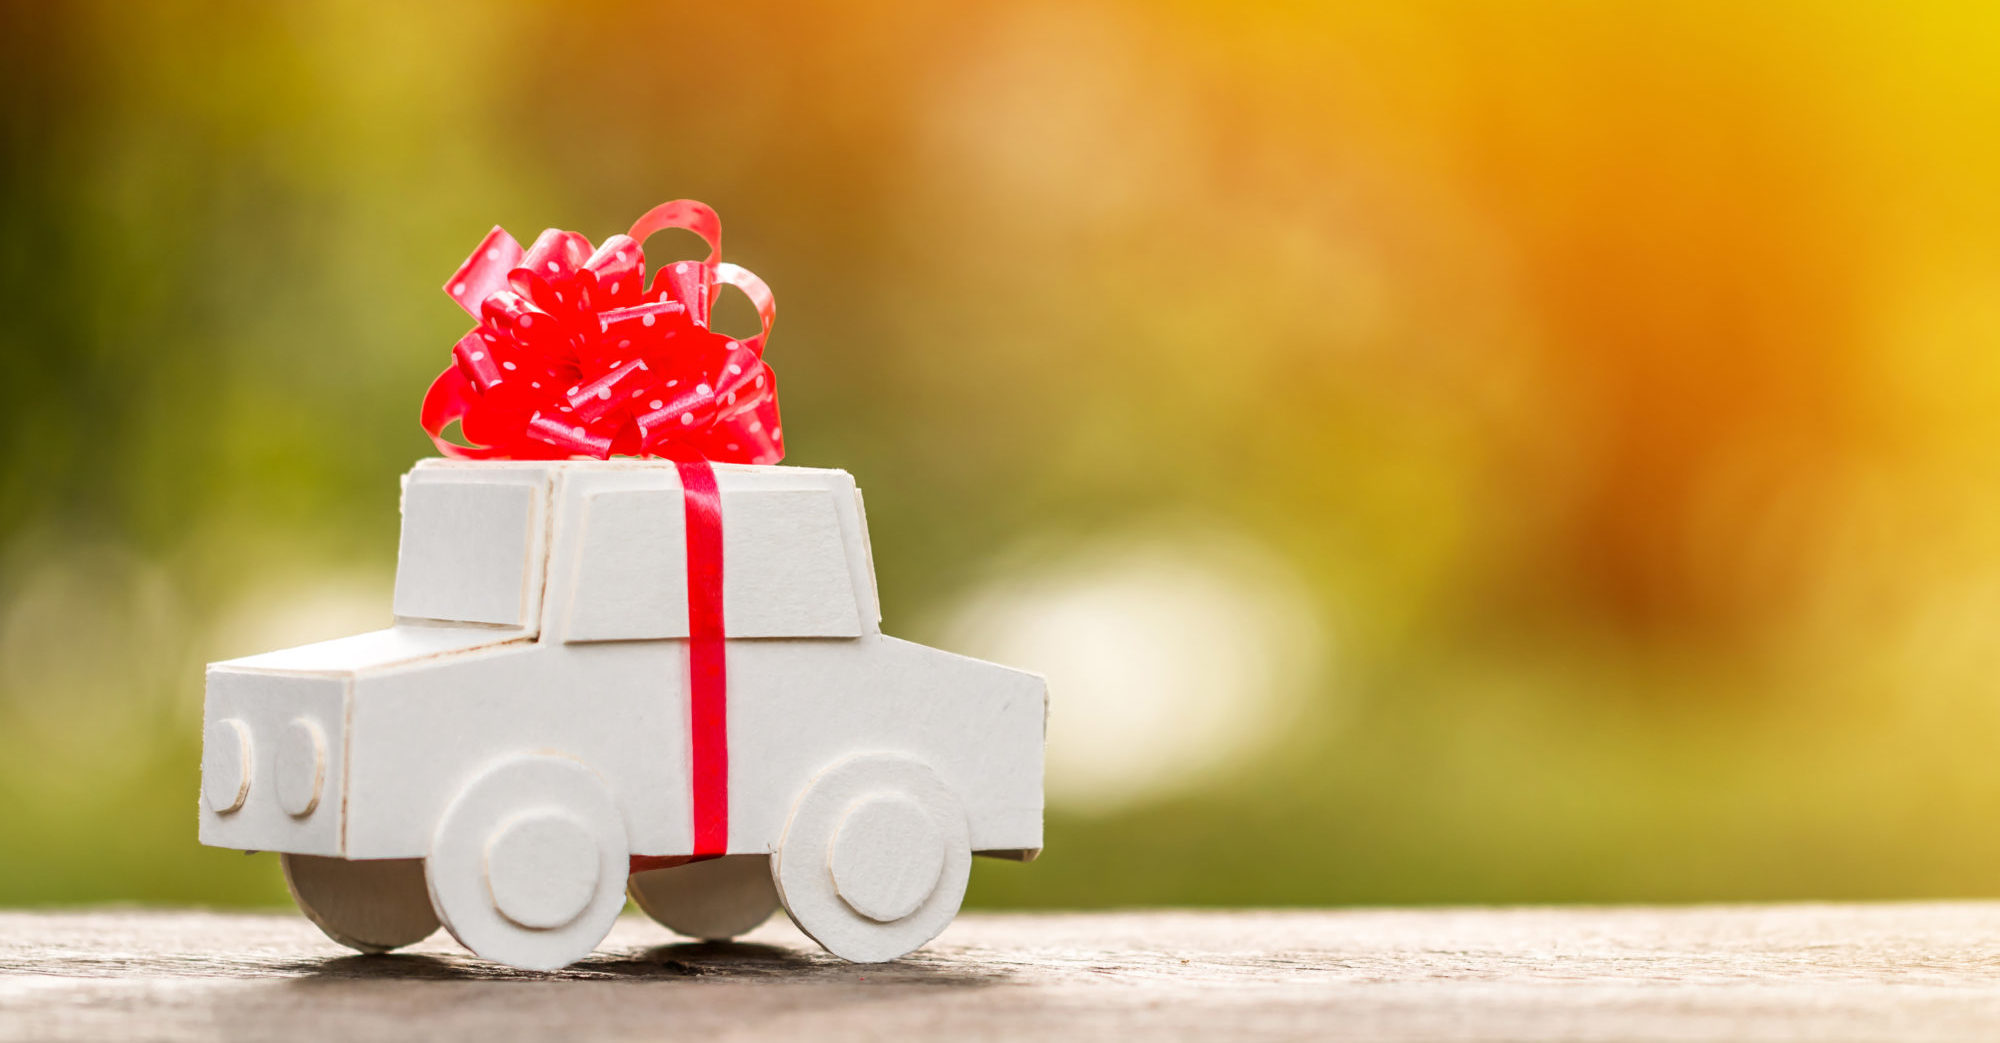 Donating Your Vehicle to Charity May Not Be A Taxwise Decision